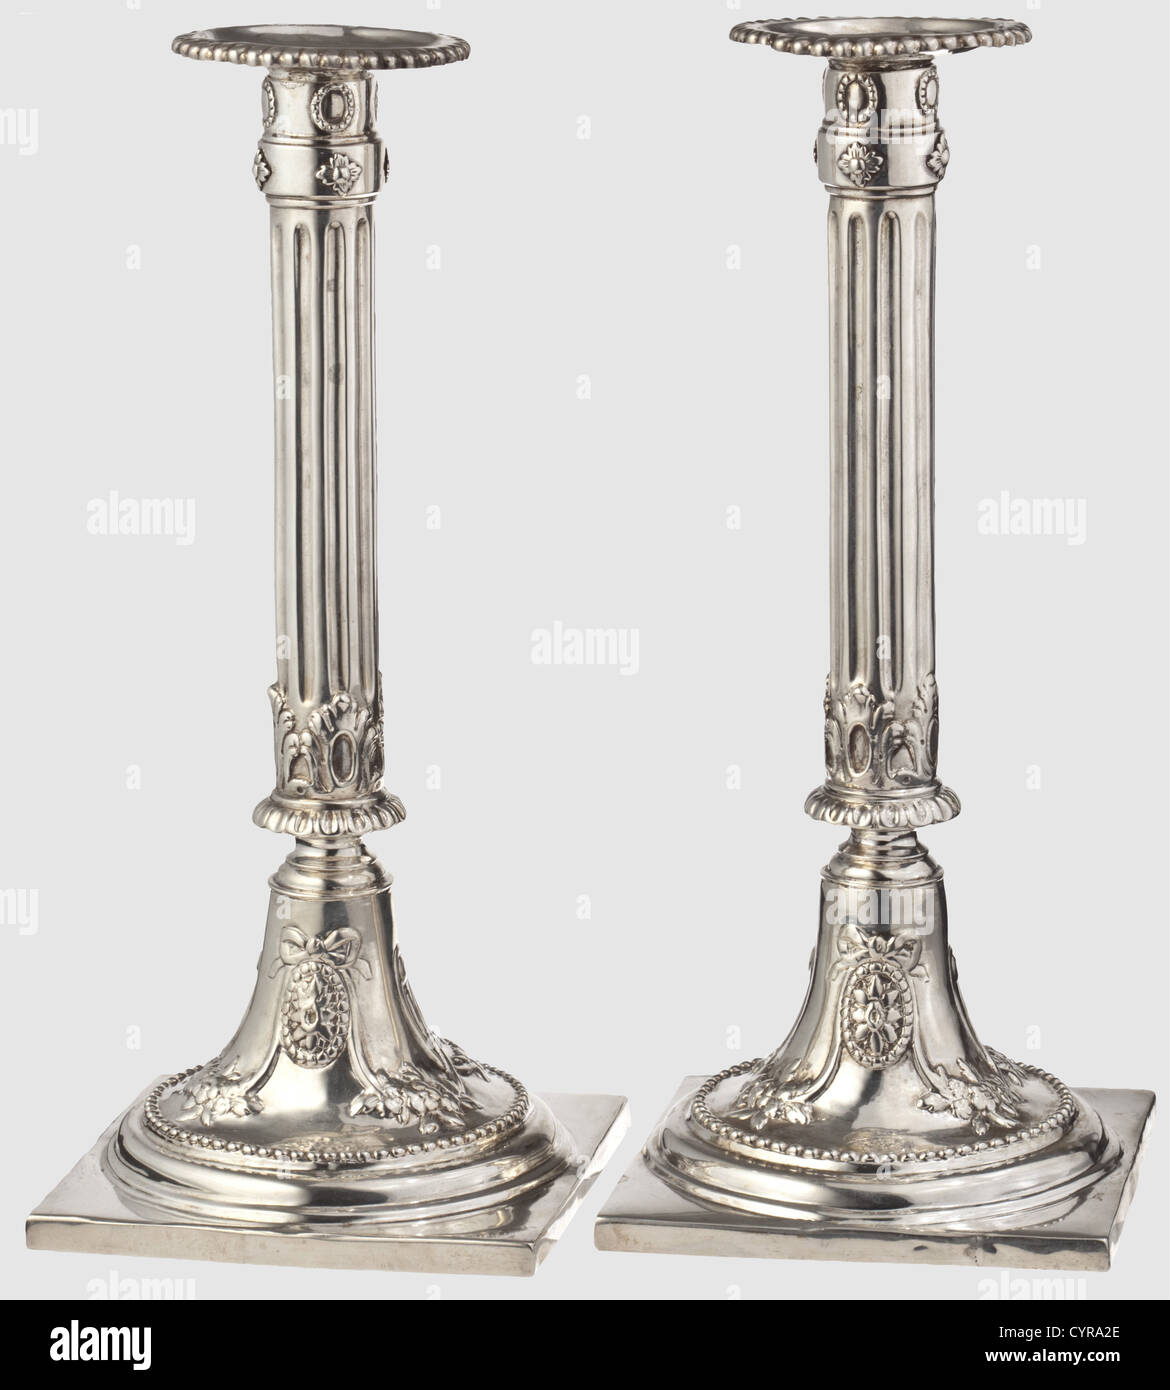 A pair of silver Empire candlesticks,Augsburg,circa 1785 Square plinths,the round candlestick feet decorated with garlands and flowers in relief.Fluted column shafts,inserted sockets with beaded edges.Each marked with the 'ICM' master's mark and the Augsburg inspection mark for the years 1785 - 87.The insert sockets bear Munich acceptance marks.Heavily cleaned,the edges of the plinths have been resoldered in places.Height of each 26.5 cm.Weight together 897 g.Johann Martin Langenbauer,active in Augsburg from 1747 to 1792.Cf.Rosenberg,vol.1,no.,Additional-Rights-Clearences-Not Available Stock Photo